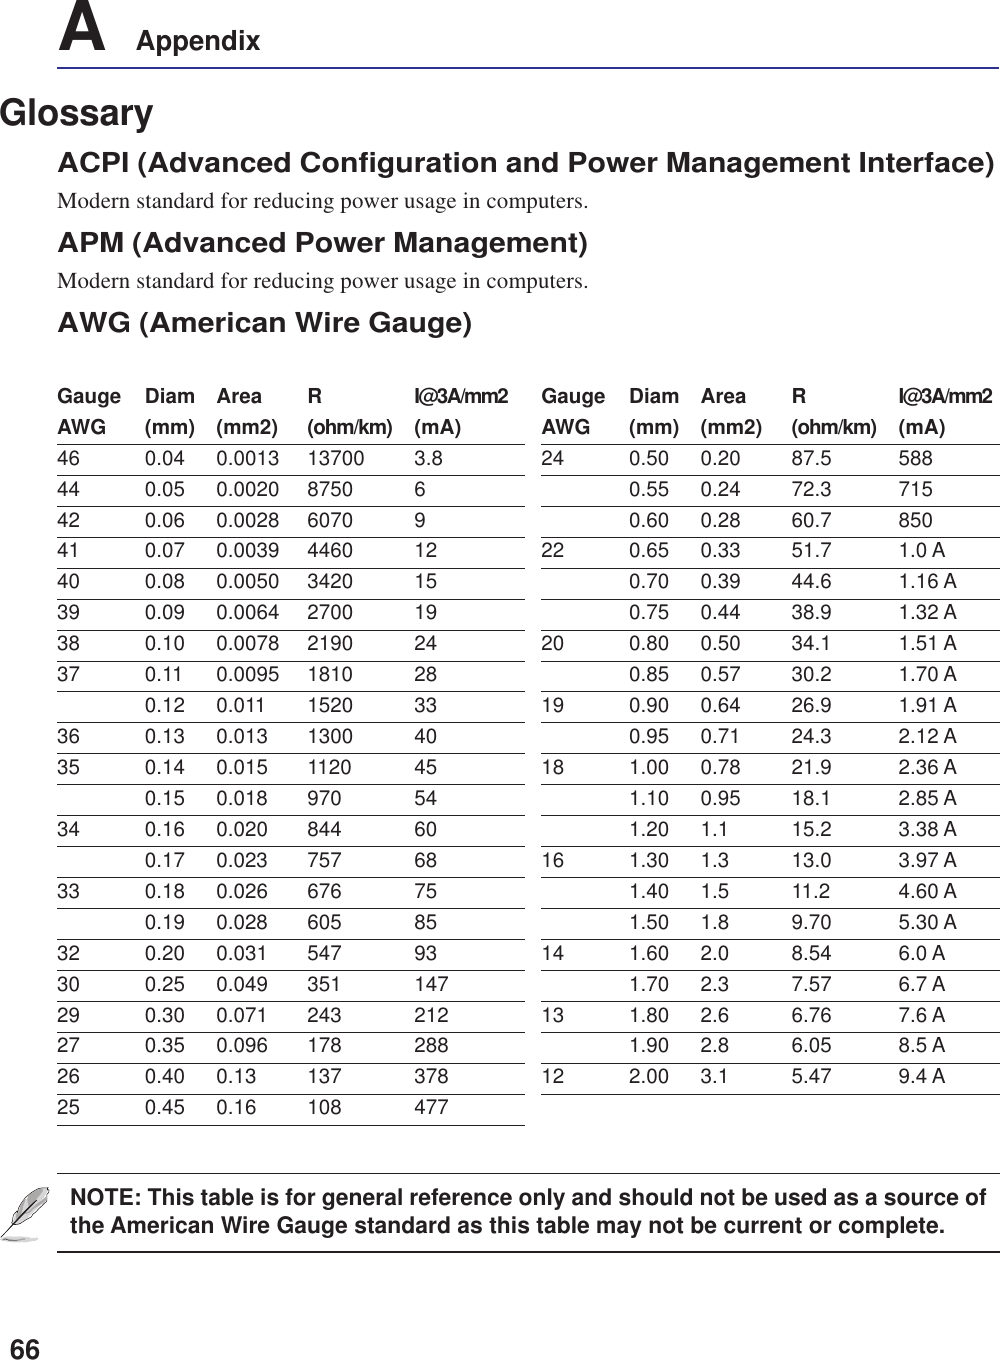 66A    AppendixGlossaryACPI (Advanced Configuration and Power Management Interface)Modern standard for reducing power usage in computers.APM (Advanced Power Management)Modern standard for reducing power usage in computers.AWG (American Wire Gauge)NOTE: This table is for general reference only and should not be used as a source ofthe American Wire Gauge standard as this table may not be current or complete.Gauge Diam Area R I@3A/mm2AWG (mm) (mm2) (ohm/km) (mA)46 0.04 0.0013 13700 3.844 0.05 0.0020 8750 642 0.06 0.0028 6070 941 0.07 0.0039 4460 1240 0.08 0.0050 3420 1539 0.09 0.0064 2700 1938 0.10 0.0078 2190 2437 0.11 0.0095 1810 280.12 0.011 1520 3336 0.13 0.013 1300 4035 0.14 0.015 1120 450.15 0.018 970 5434 0.16 0.020 844 600.17 0.023 757 6833 0.18 0.026 676 750.19 0.028 605 8532 0.20 0.031 547 9330 0.25 0.049 351 14729 0.30 0.071 243 21227 0.35 0.096 178 28826 0.40 0.13 137 37825 0.45 0.16 108 477Gauge Diam Area R I@3A/mm2AWG (mm) (mm2) (ohm/km) (mA)24 0.50 0.20 87.5 5880.55 0.24 72.3 7150.60 0.28 60.7 85022 0.65 0.33 51.7 1.0 A0.70 0.39 44.6 1.16 A0.75 0.44 38.9 1.32 A20 0.80 0.50 34.1 1.51 A0.85 0.57 30.2 1.70 A19 0.90 0.64 26.9 1.91 A0.95 0.71 24.3 2.12 A18 1.00 0.78 21.9 2.36 A1.10 0.95 18.1 2.85 A1.20 1.1 15.2 3.38 A16 1.30 1.3 13.0 3.97 A1.40 1.5 11.2 4.60 A1.50 1.8 9.70 5.30 A14 1.60 2.0 8.54 6.0 A1.70 2.3 7.57 6.7 A13 1.80 2.6 6.76 7.6 A1.90 2.8 6.05 8.5 A12 2.00 3.1 5.47 9.4 A